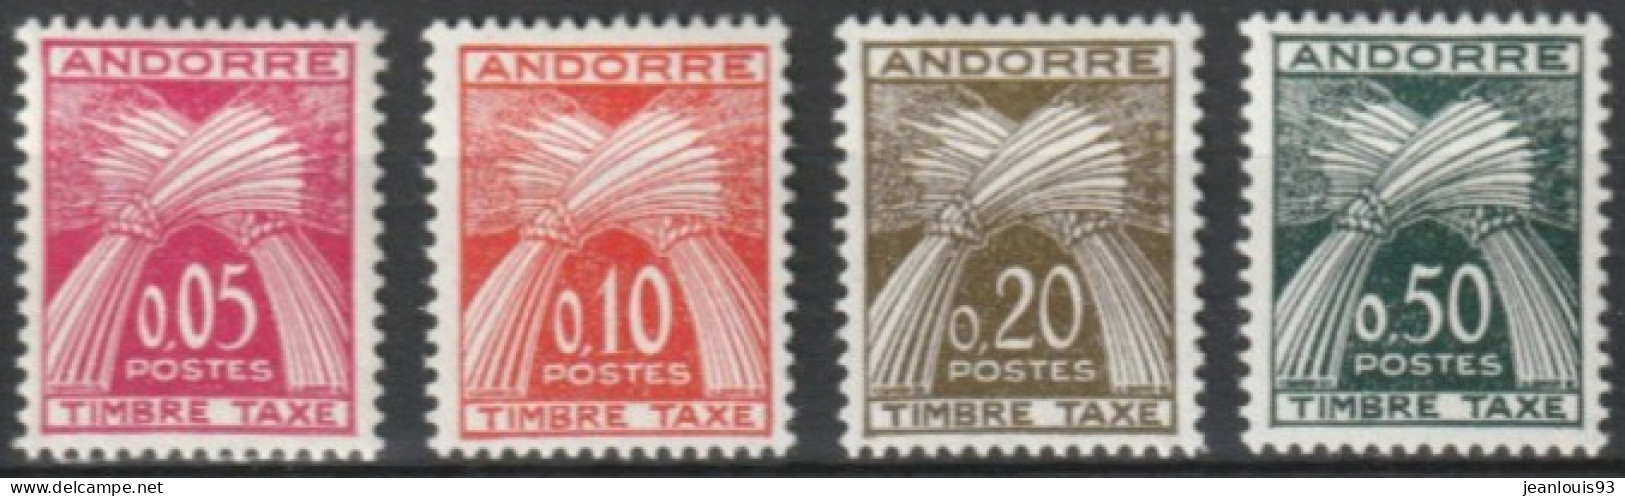 ANDORRE FRANCAIS - TAXE 42/45 COMPLETE NEUF* AVEC CHARNIERE COTE 70 EUR - Unused Stamps